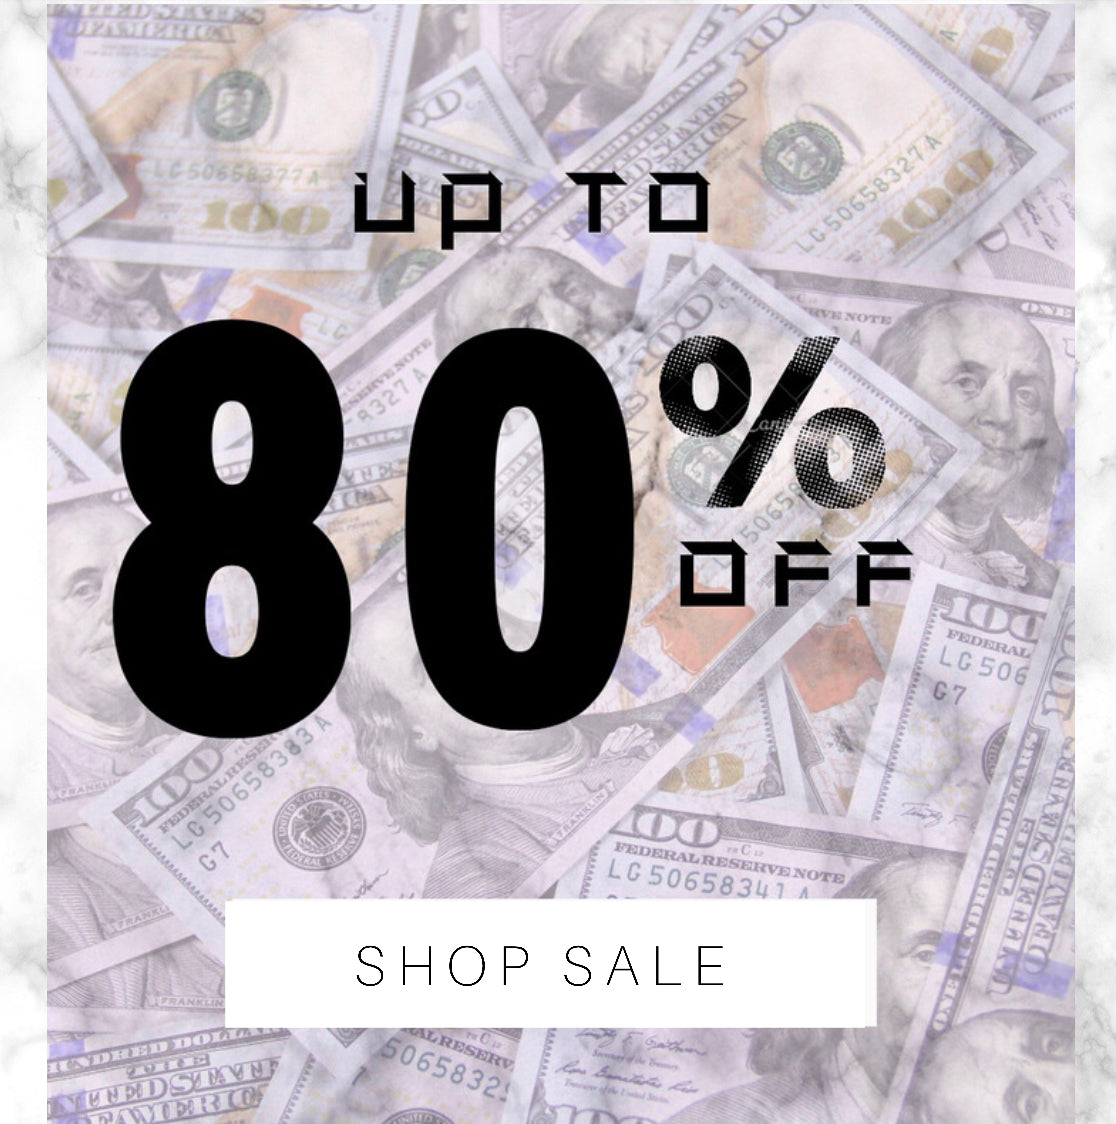 Who Doesn't love a good sale? Slay effortlessly for less and shop everything from sale tops, bags, dresses, accessories and more at unreal low prices. If you're ballin' on a budget, get it before it's gone.